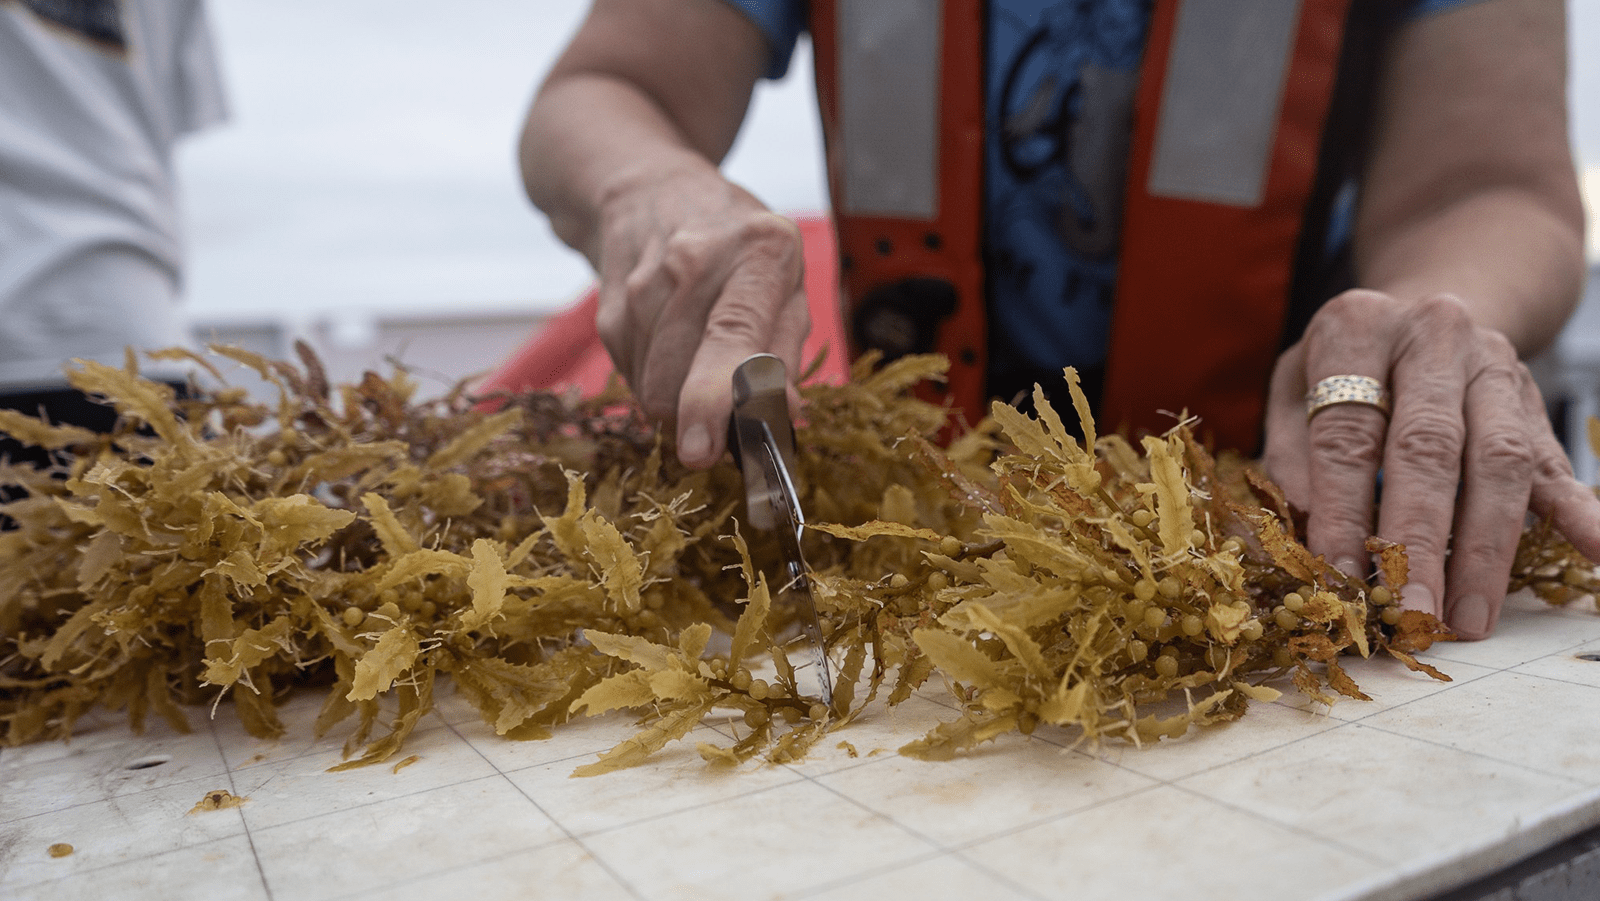 Sargassum is cut with a pizza cutter on a table.